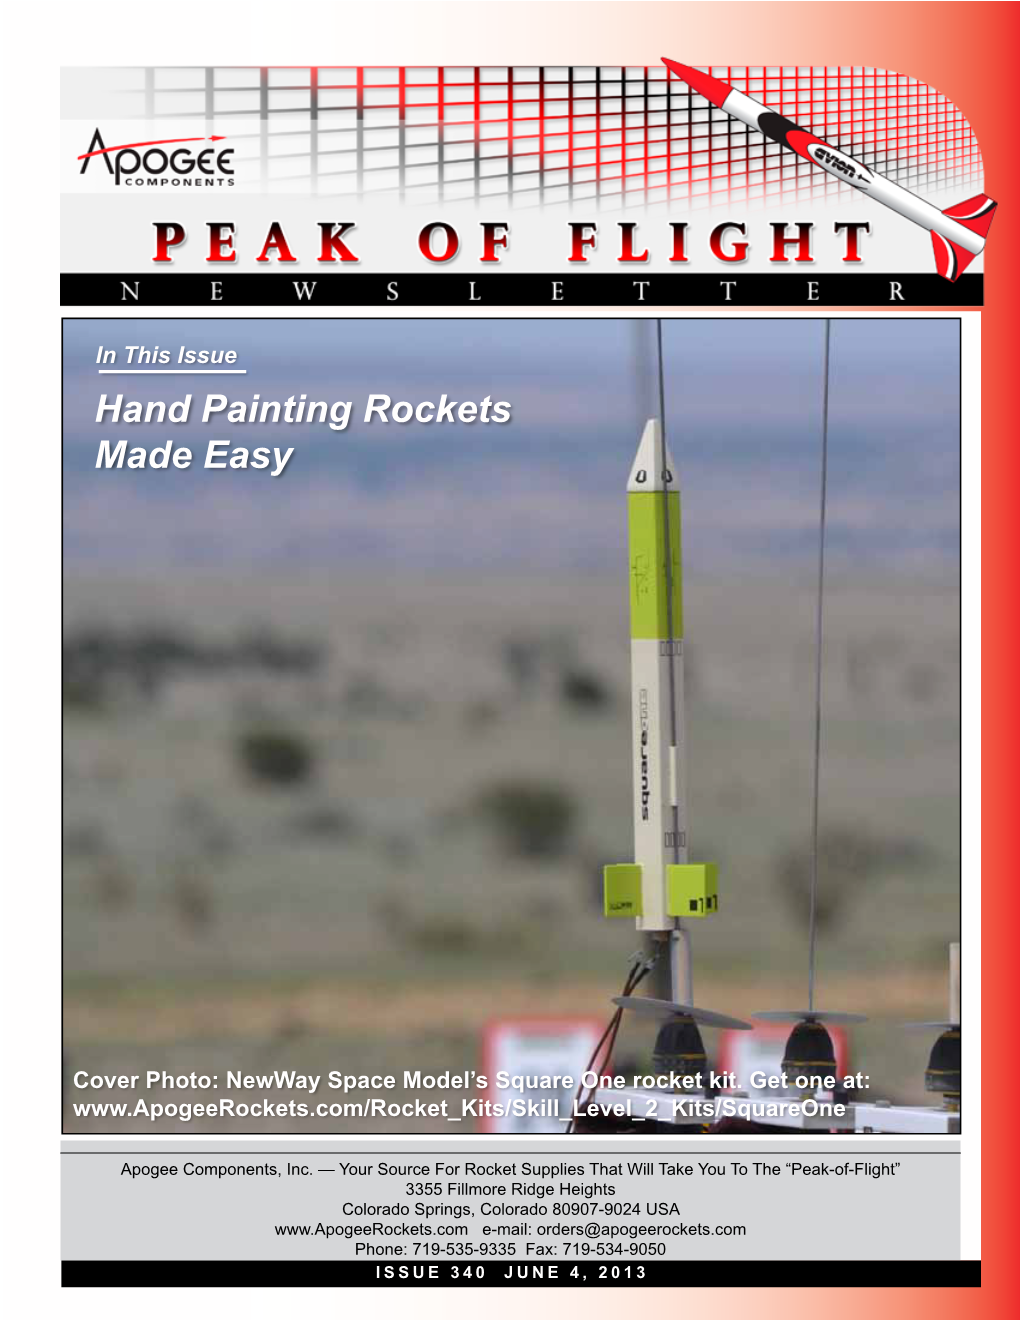 Hand Painting Rockets Made Easy